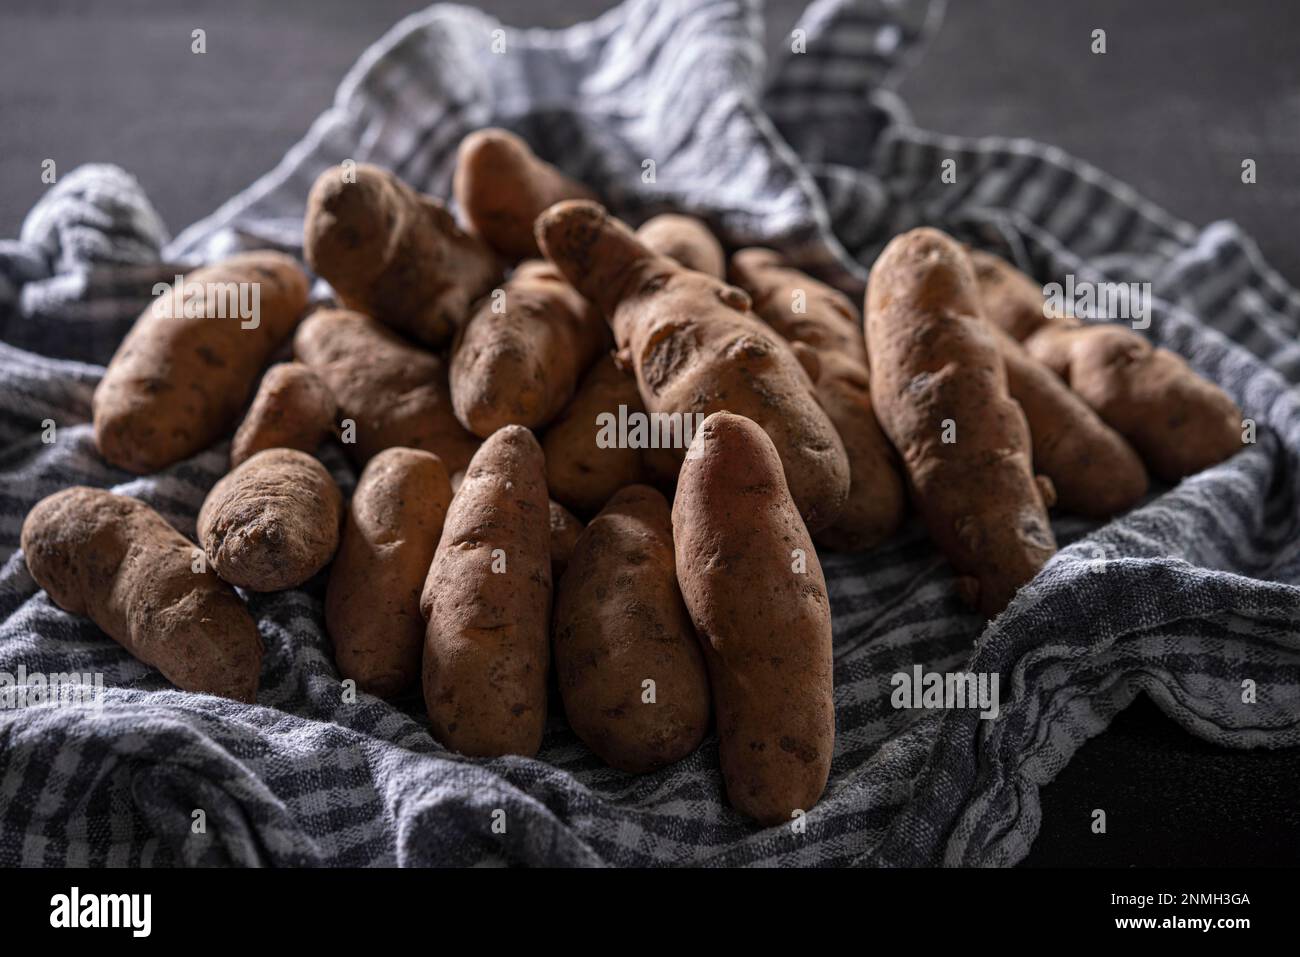 Bamberger Hoernla, also Bamberger Hoernchen, an old potato variety from Franconia, potato, with tea towel, food photography Stock Photo